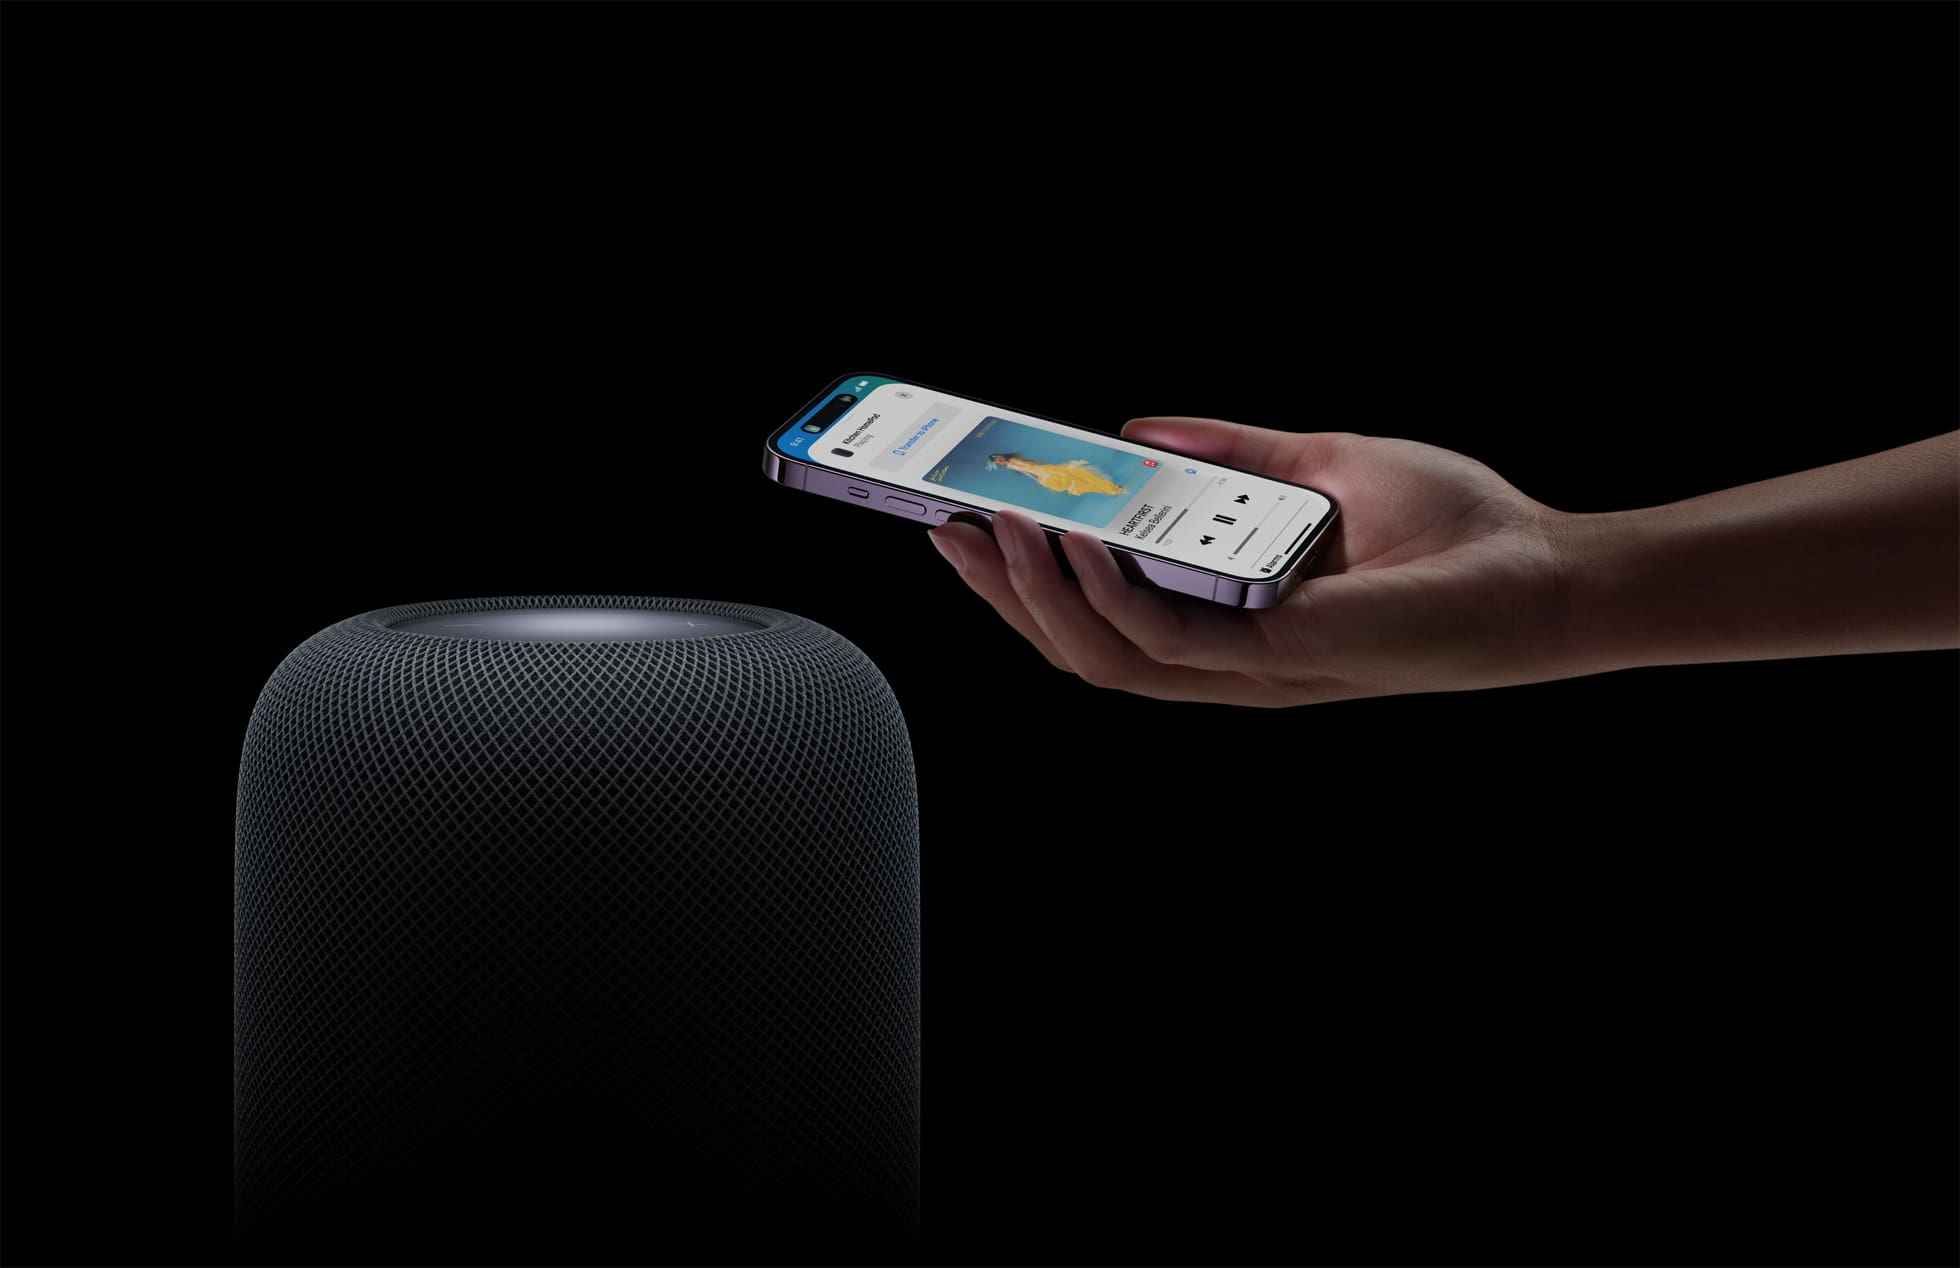 Apple HomePod: Every tip and trick you need to know - CNET